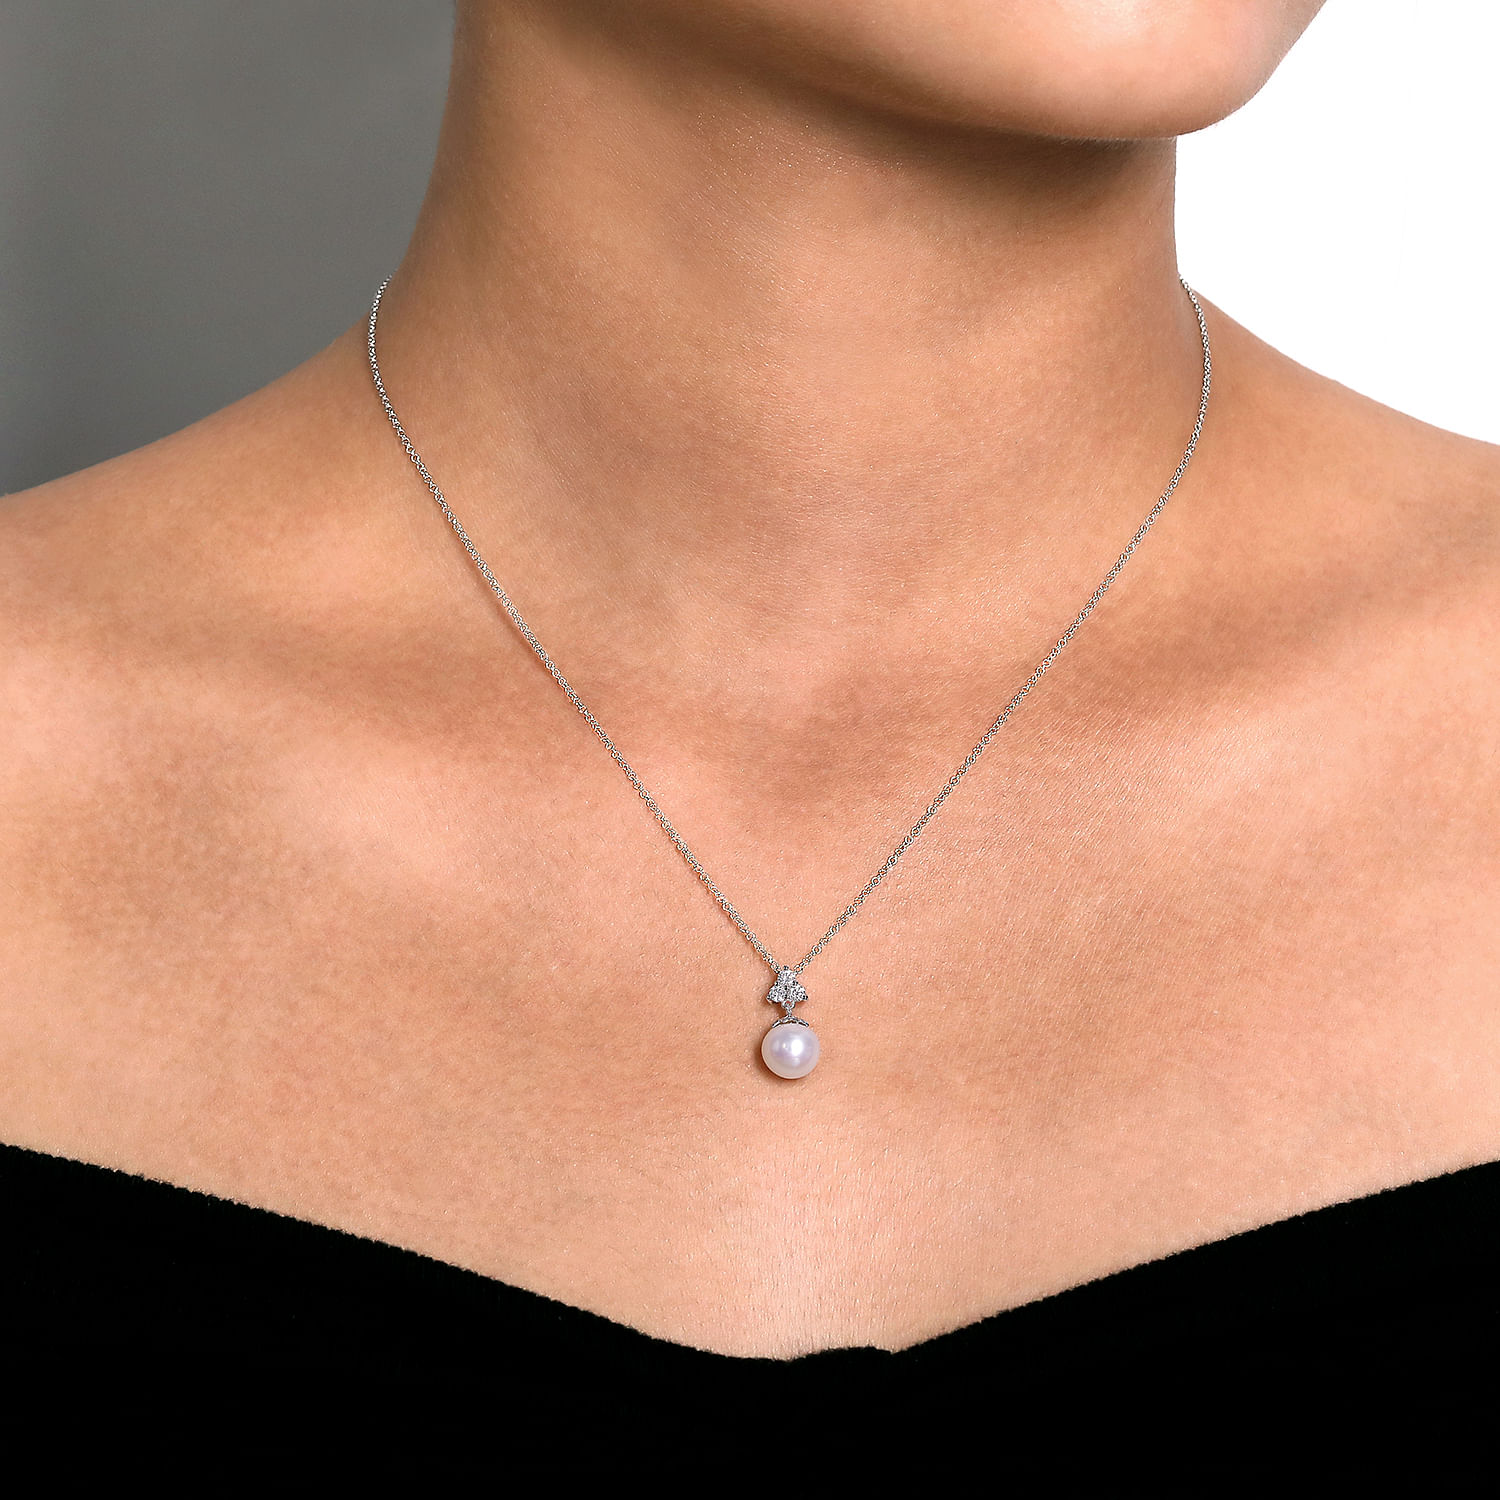 14K White Gold Cultured Pearl Drop Necklace with Diamond Accent